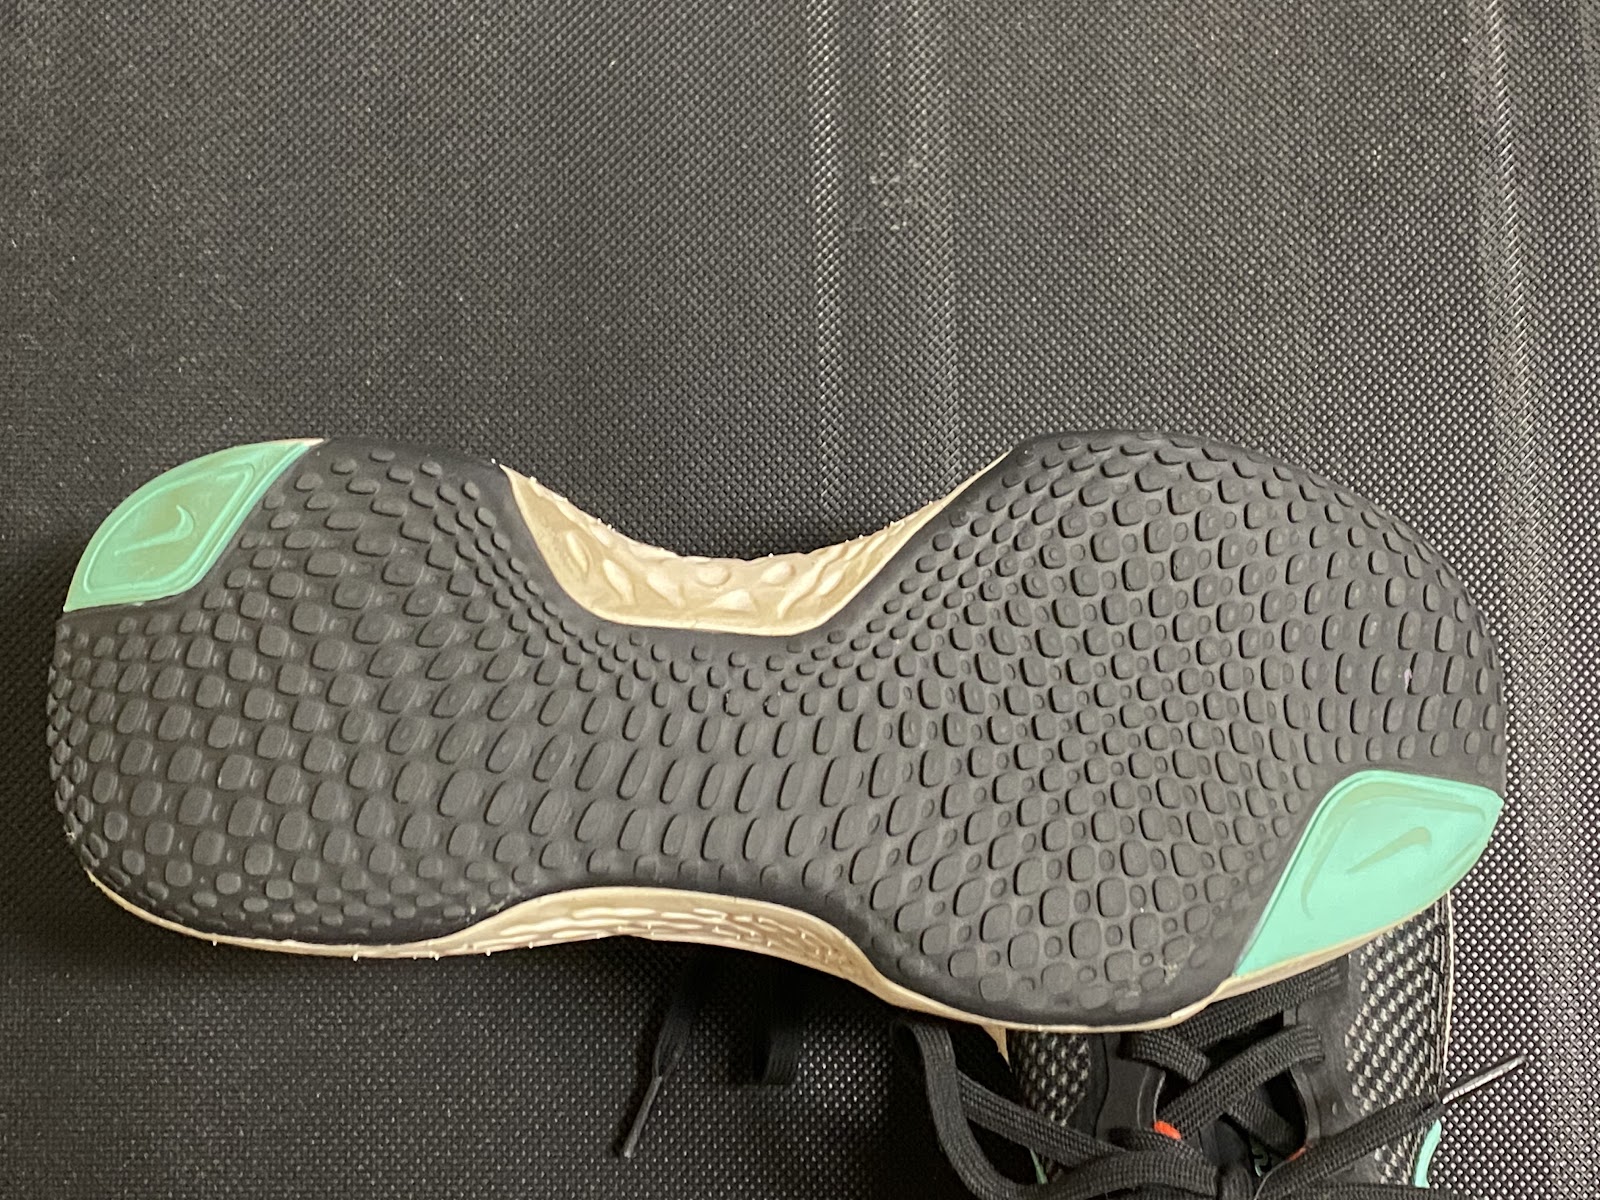 Road Trail Run: Nike ZoomX Invincible Run Fk 125 Mile Review and Durability  Update